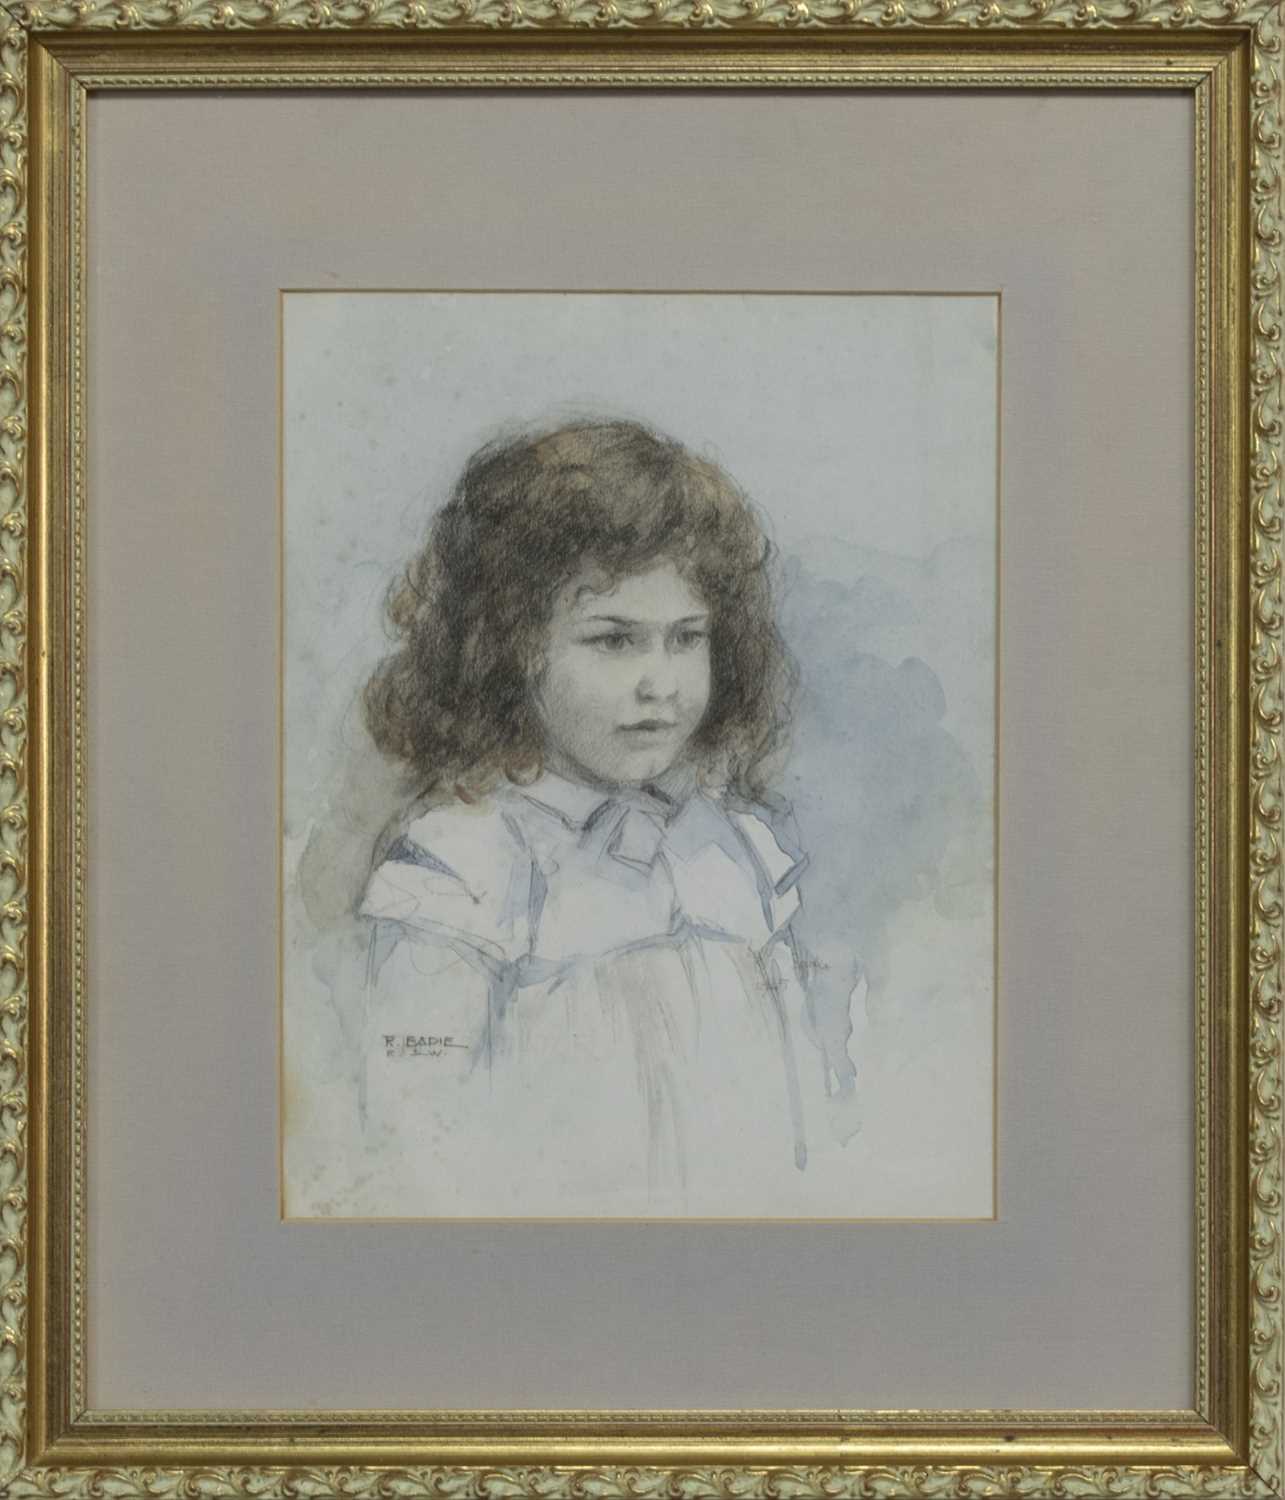 Lot 59 - STUDY OF A YOUNG GIRL, A WATERCOLOUR BY ROBERT EADIE